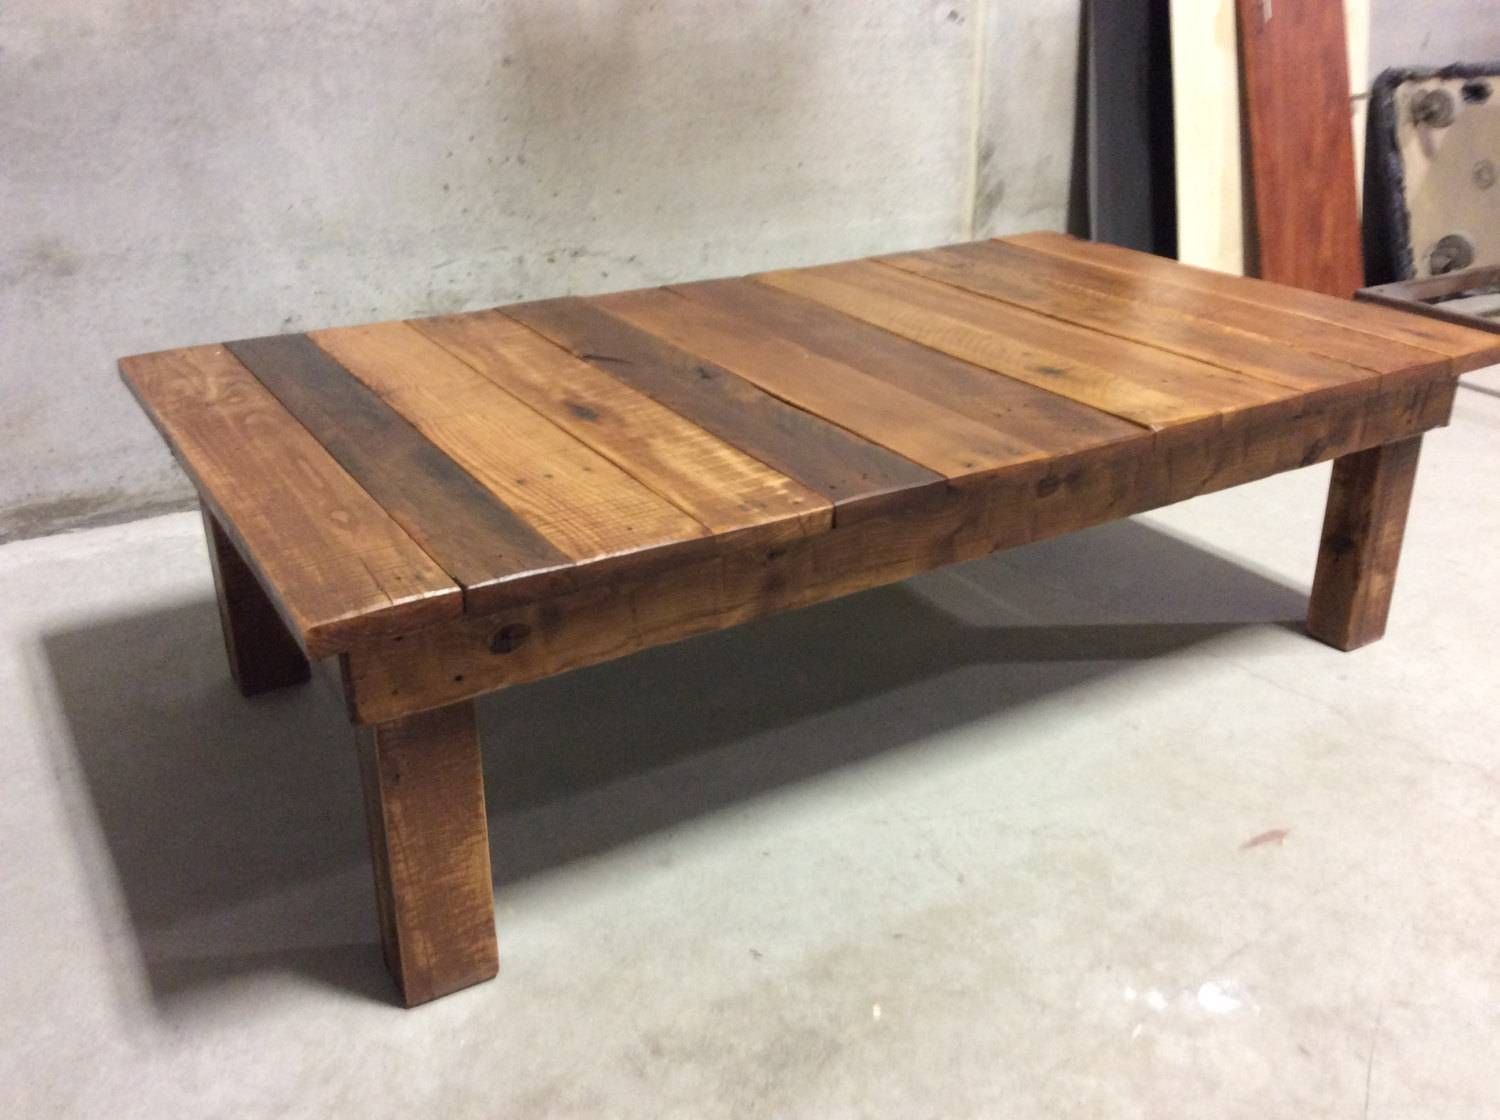 Large Reclaimed Wood Coffee Table Inside Reclaimed Wood Coffee Tables (View 2 of 15)